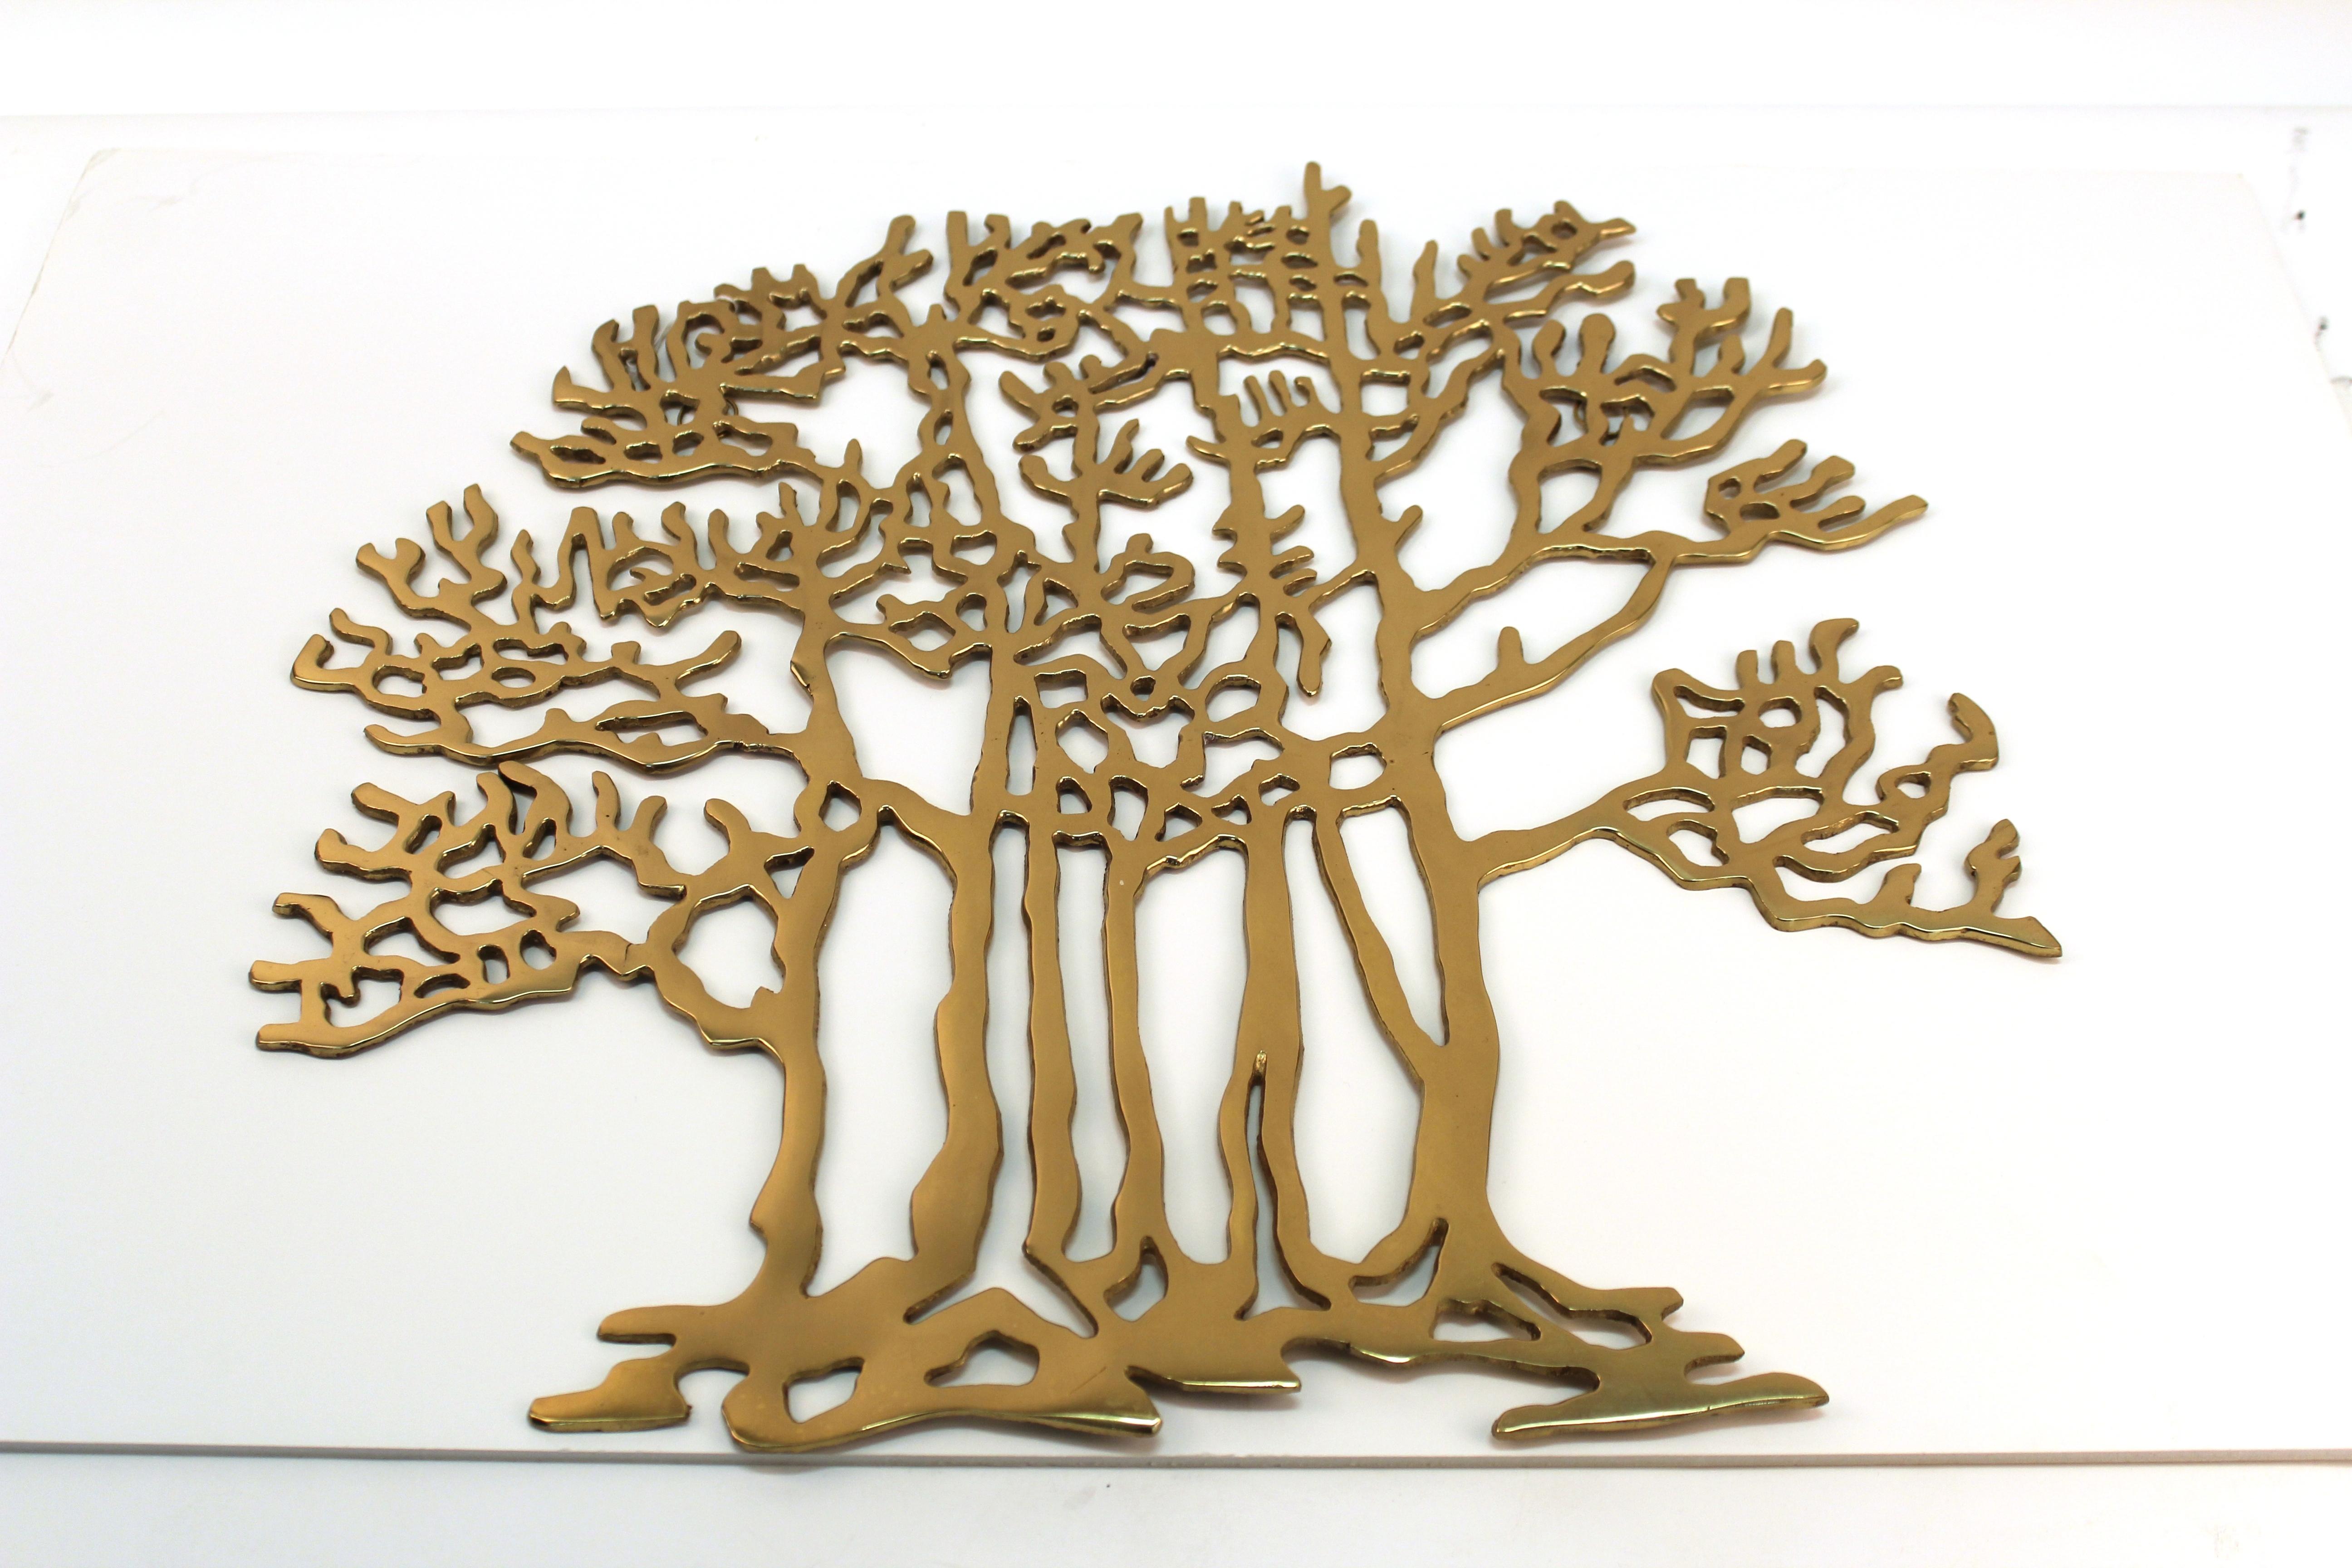 Modern heavy brass wall sculpture in shape of a tree, made by Bijan during the 1980s in the United States. The piece is in good vintage condition and has age-appropriate patina.